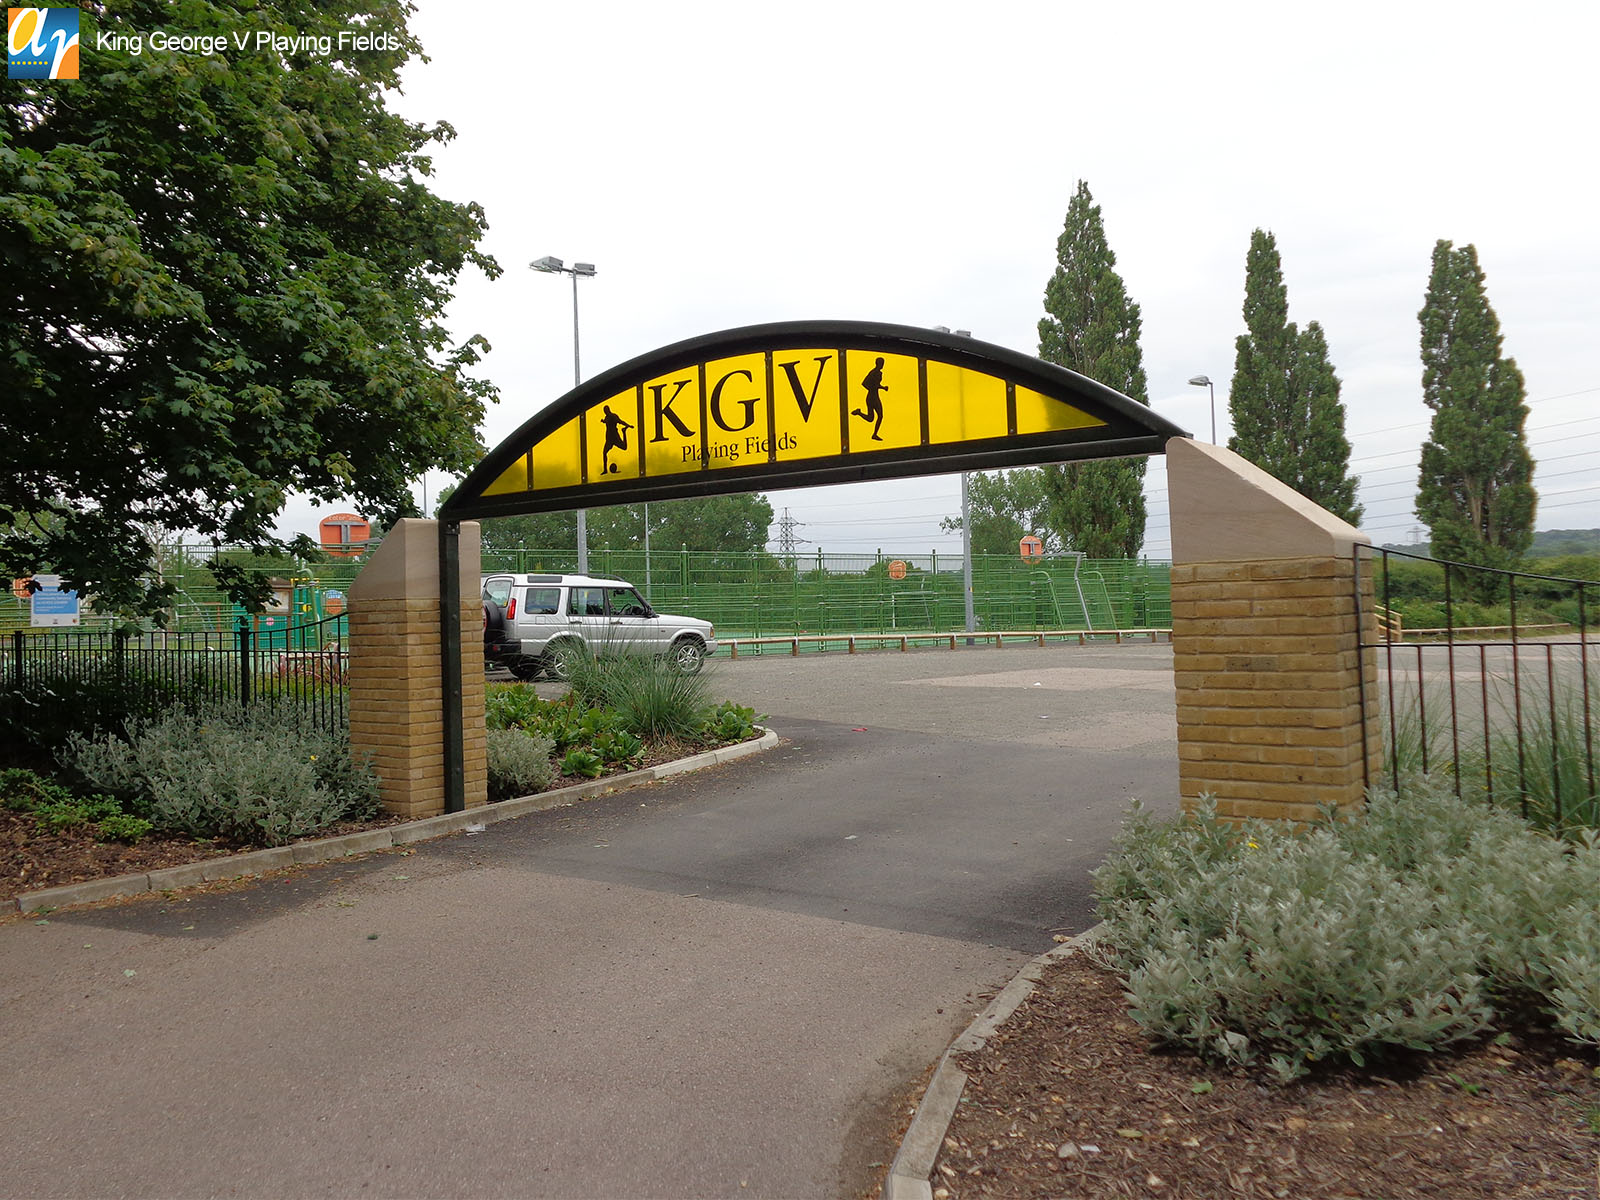 King George V Playing fields metal archway